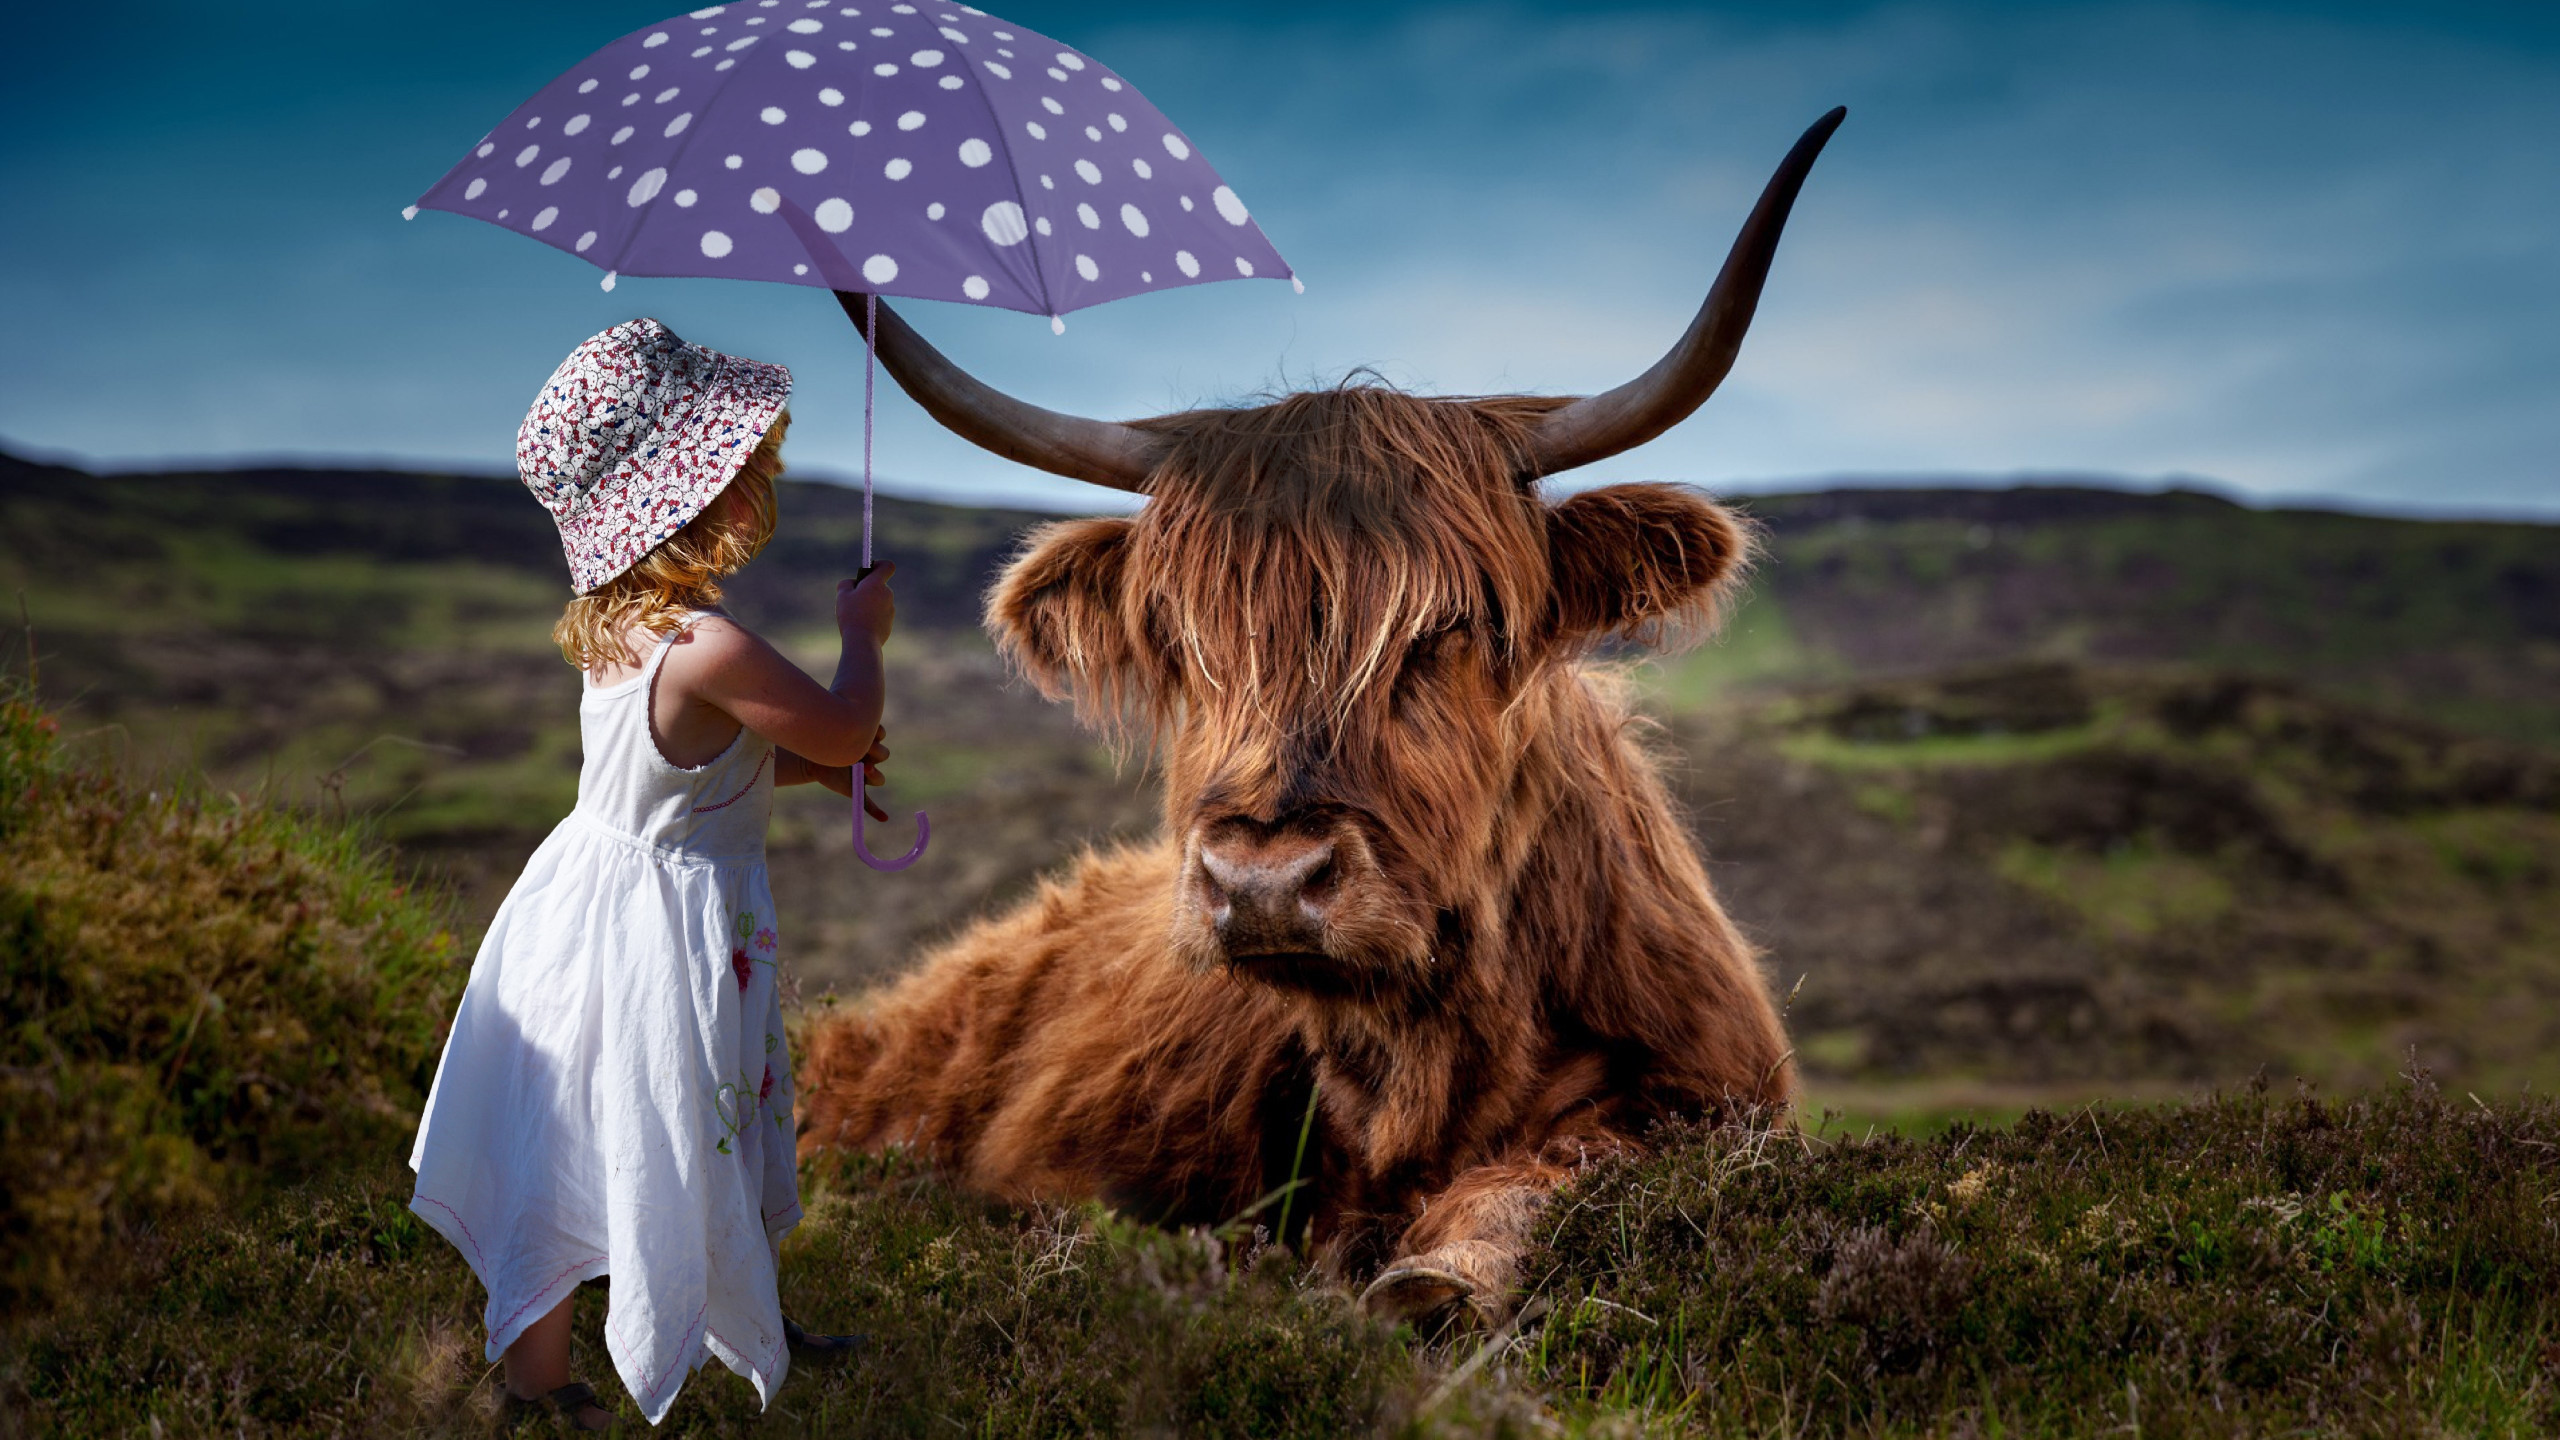 Child with the umbrella and the funny cow wallpaper 2560x1440